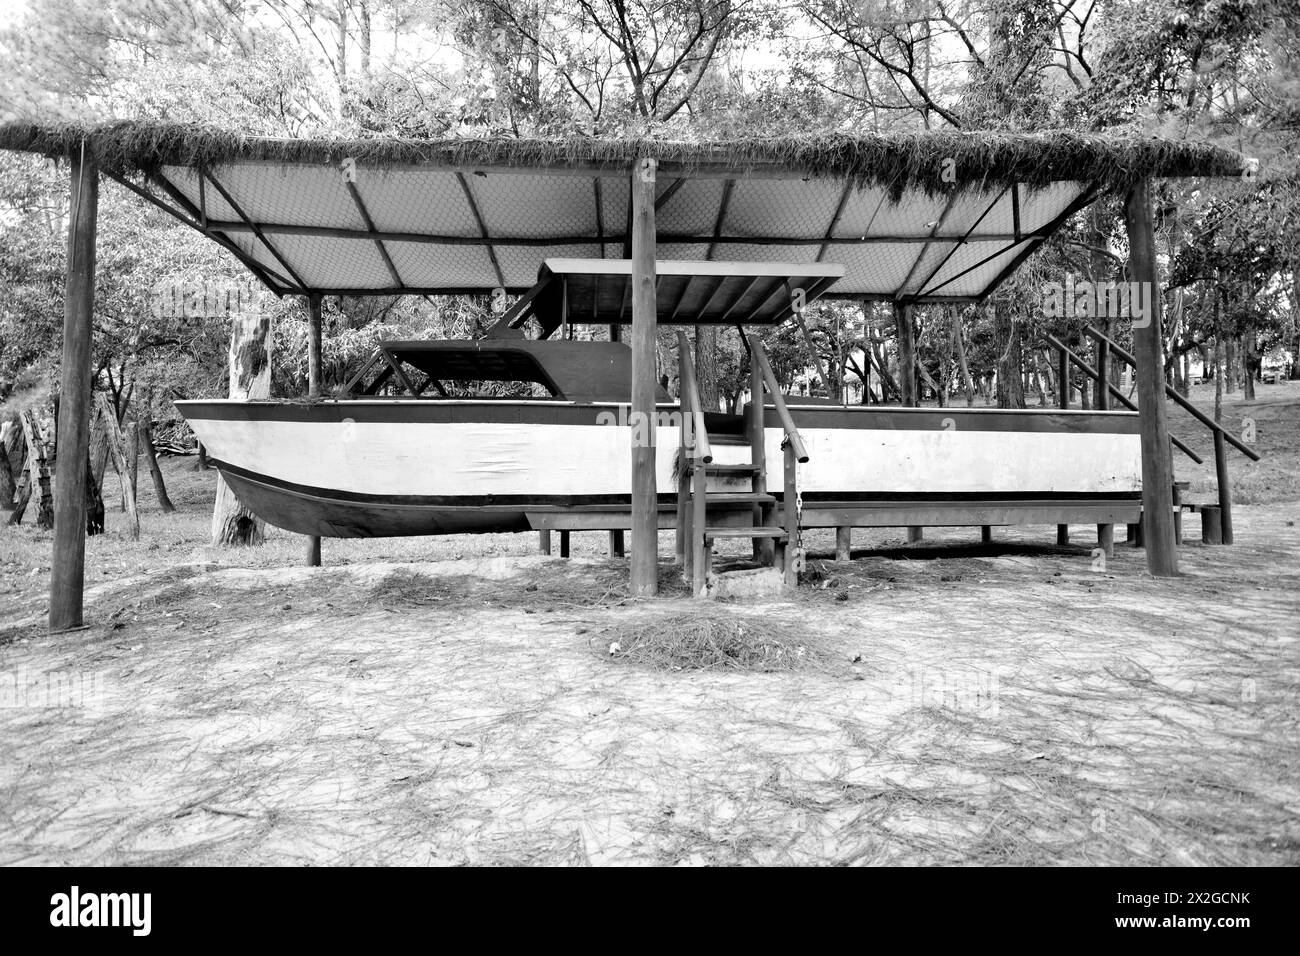 Wooden boat on display on a rural property for tourists to visit. monochrome Stock Photo